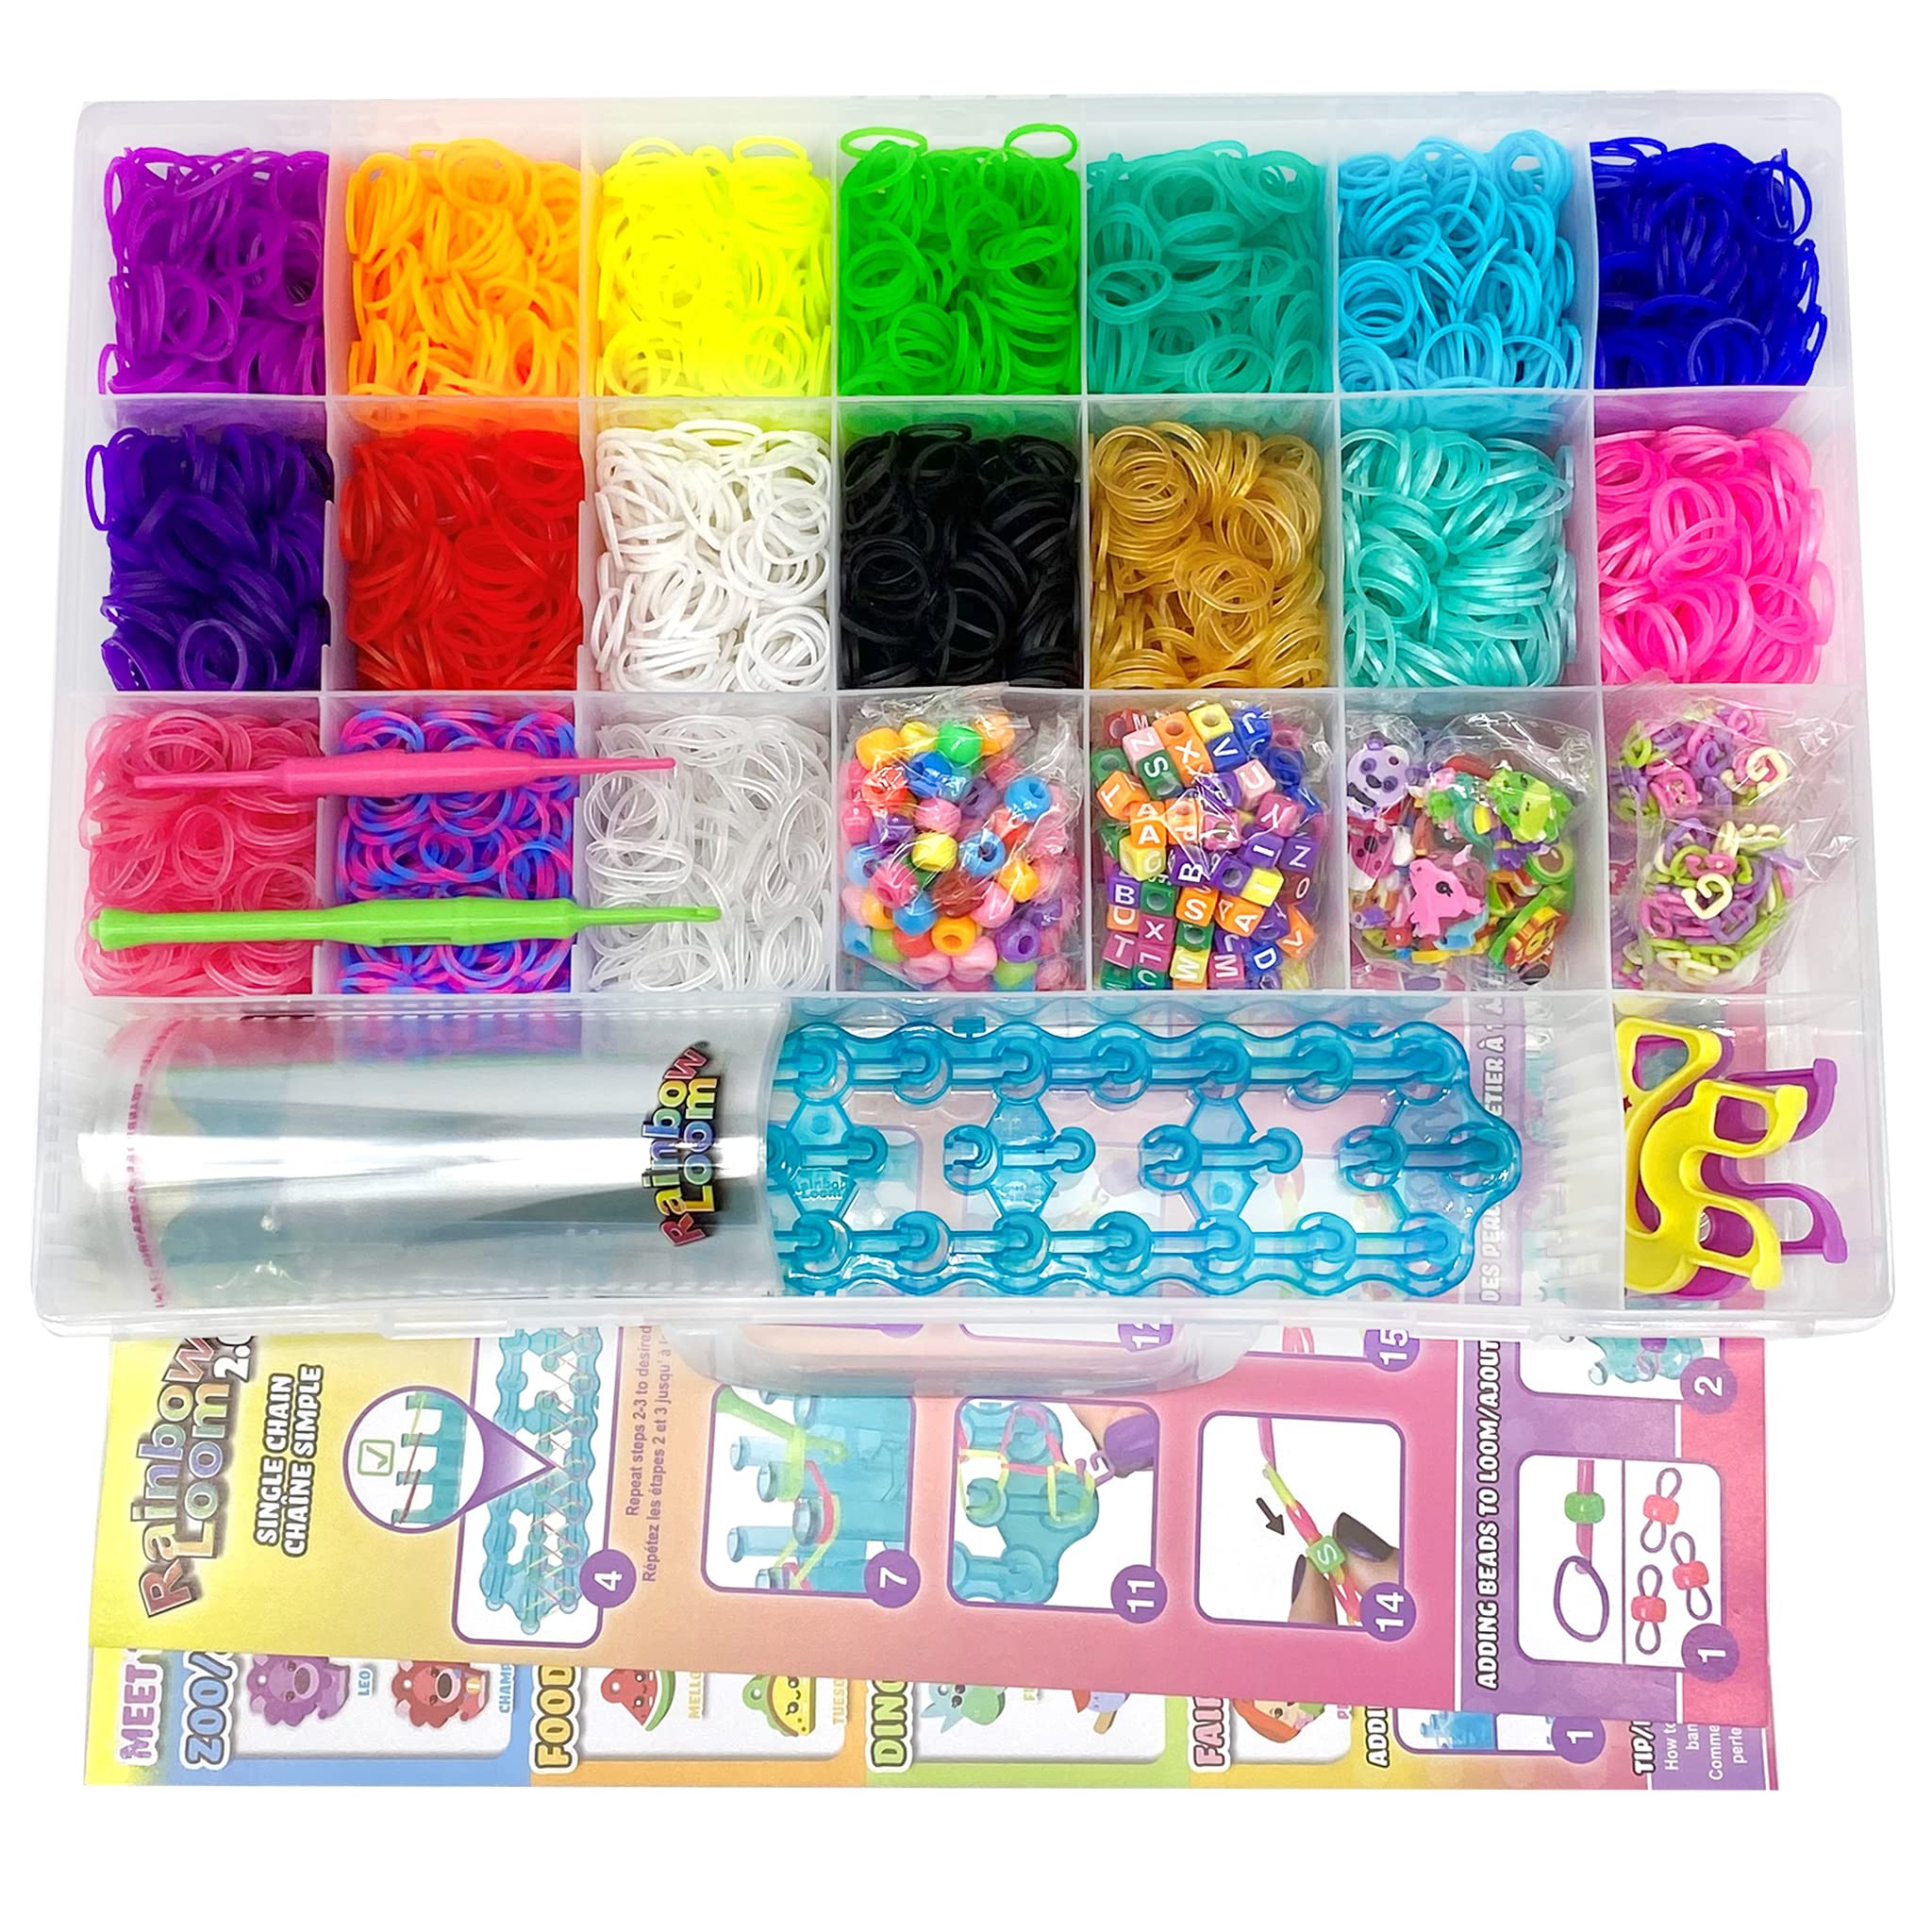 Rainbow Loom® Loomi-Pals™ MEGA Set, Features 60 CUTE Assorted LP Charms, the NEW RL2.0, Happy Looms, Hooks, Alpha & Pony Beads, 5600 Colorful Bands all in a Carrying Case for Boys and Girls 7+